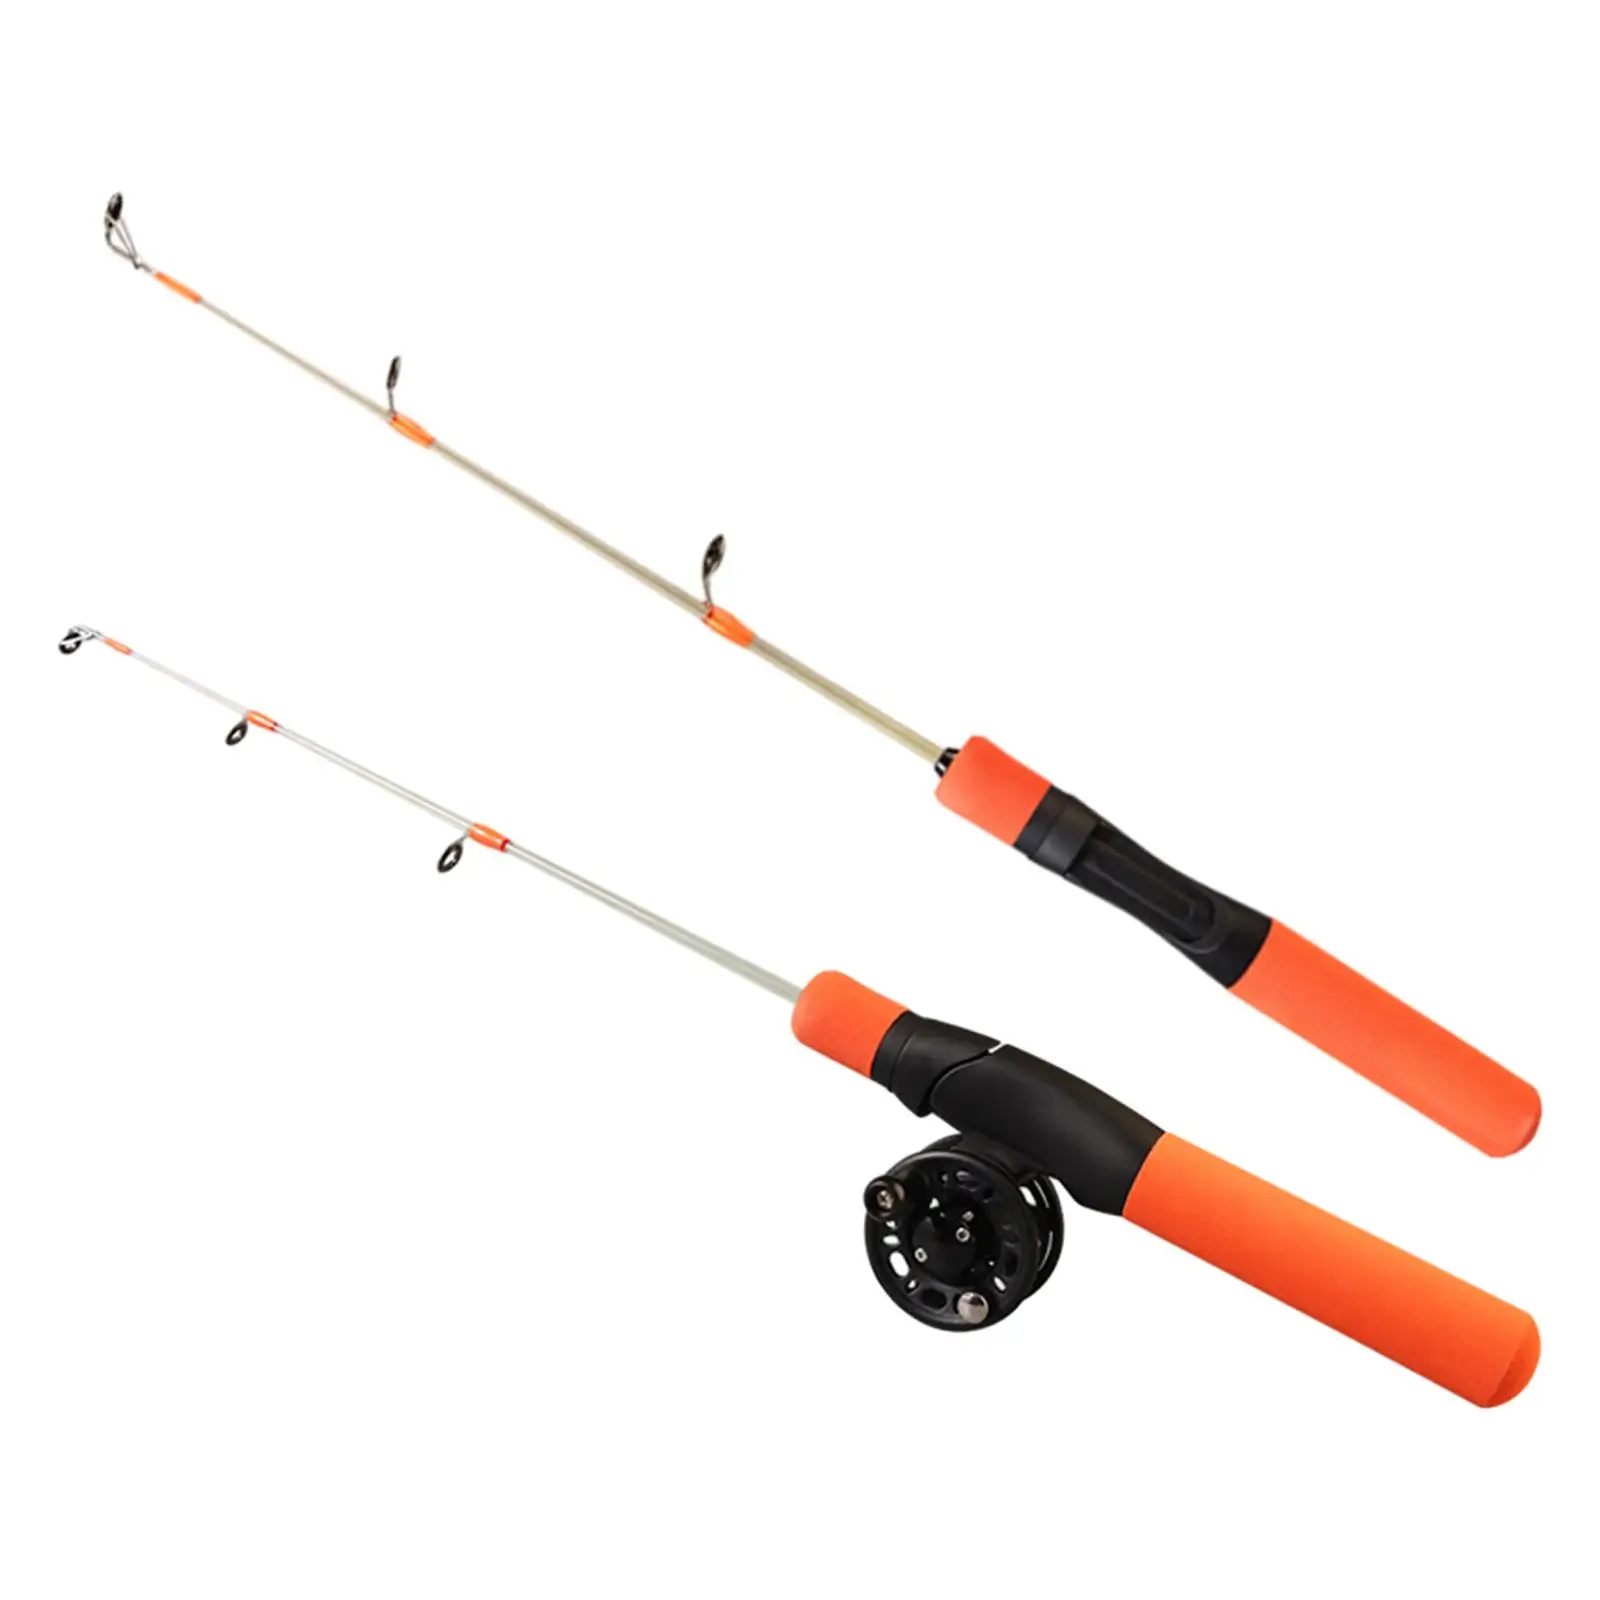 Ice Fishing Pole for Adults Lightweight Fishing Gear for Lake River Fishing